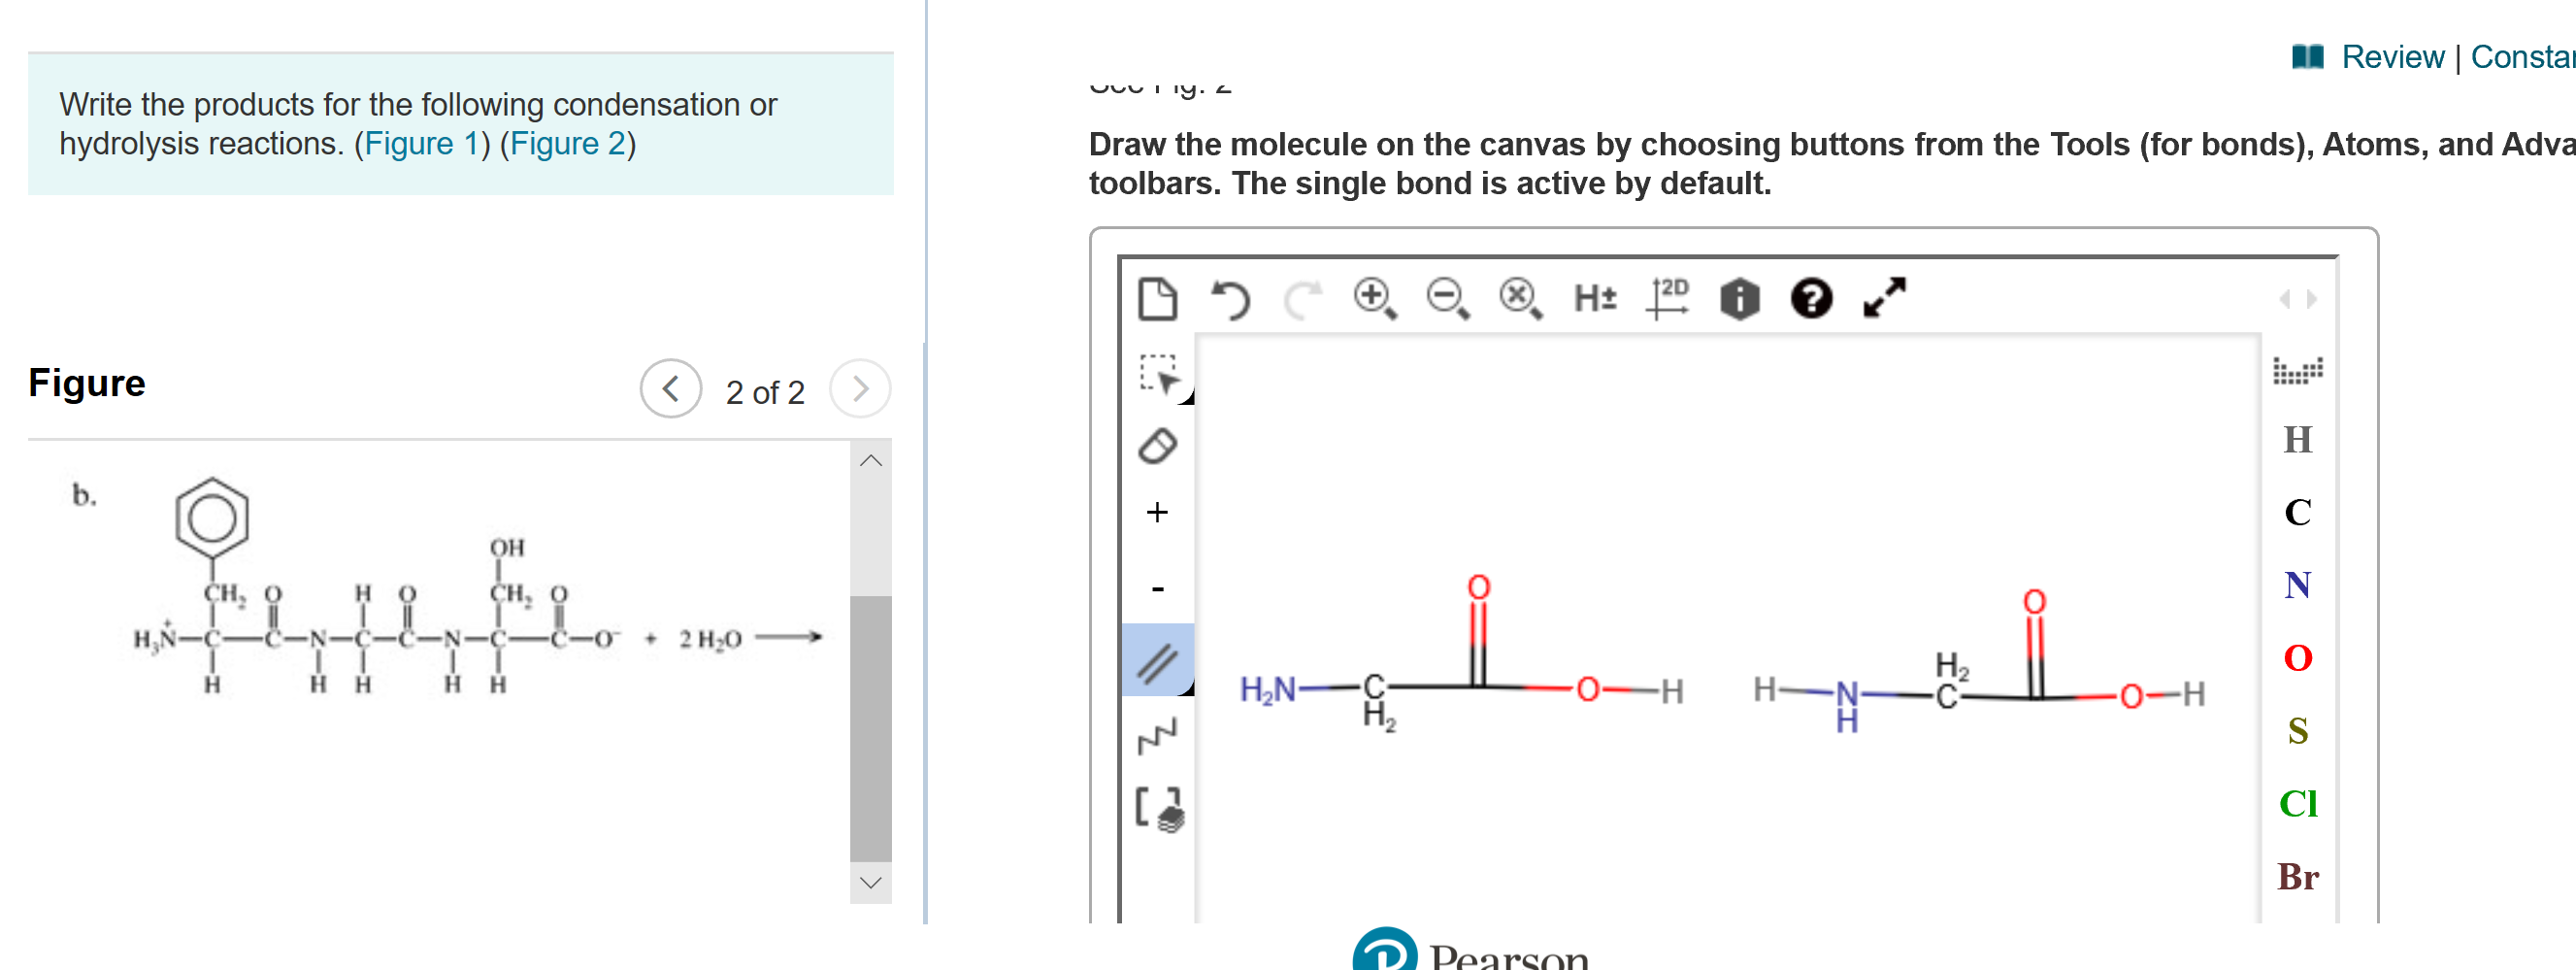 I Review | Constar
Write the products for the following condensation or
hydrolysis reactions. (Figure 1) (Figure 2)
Draw the molecule on the canvas by choosing buttons from the Tools (for bonds), Atoms, and Adva
toolbars. The single bond is active by default.
Figure
く
2 of 2
н
b.
Он
сн, о
ҫн, о
+ 2 H;0
-C-
H-N-
На
нн
H,N-
-0-H
[
CI
Br
Pearson
